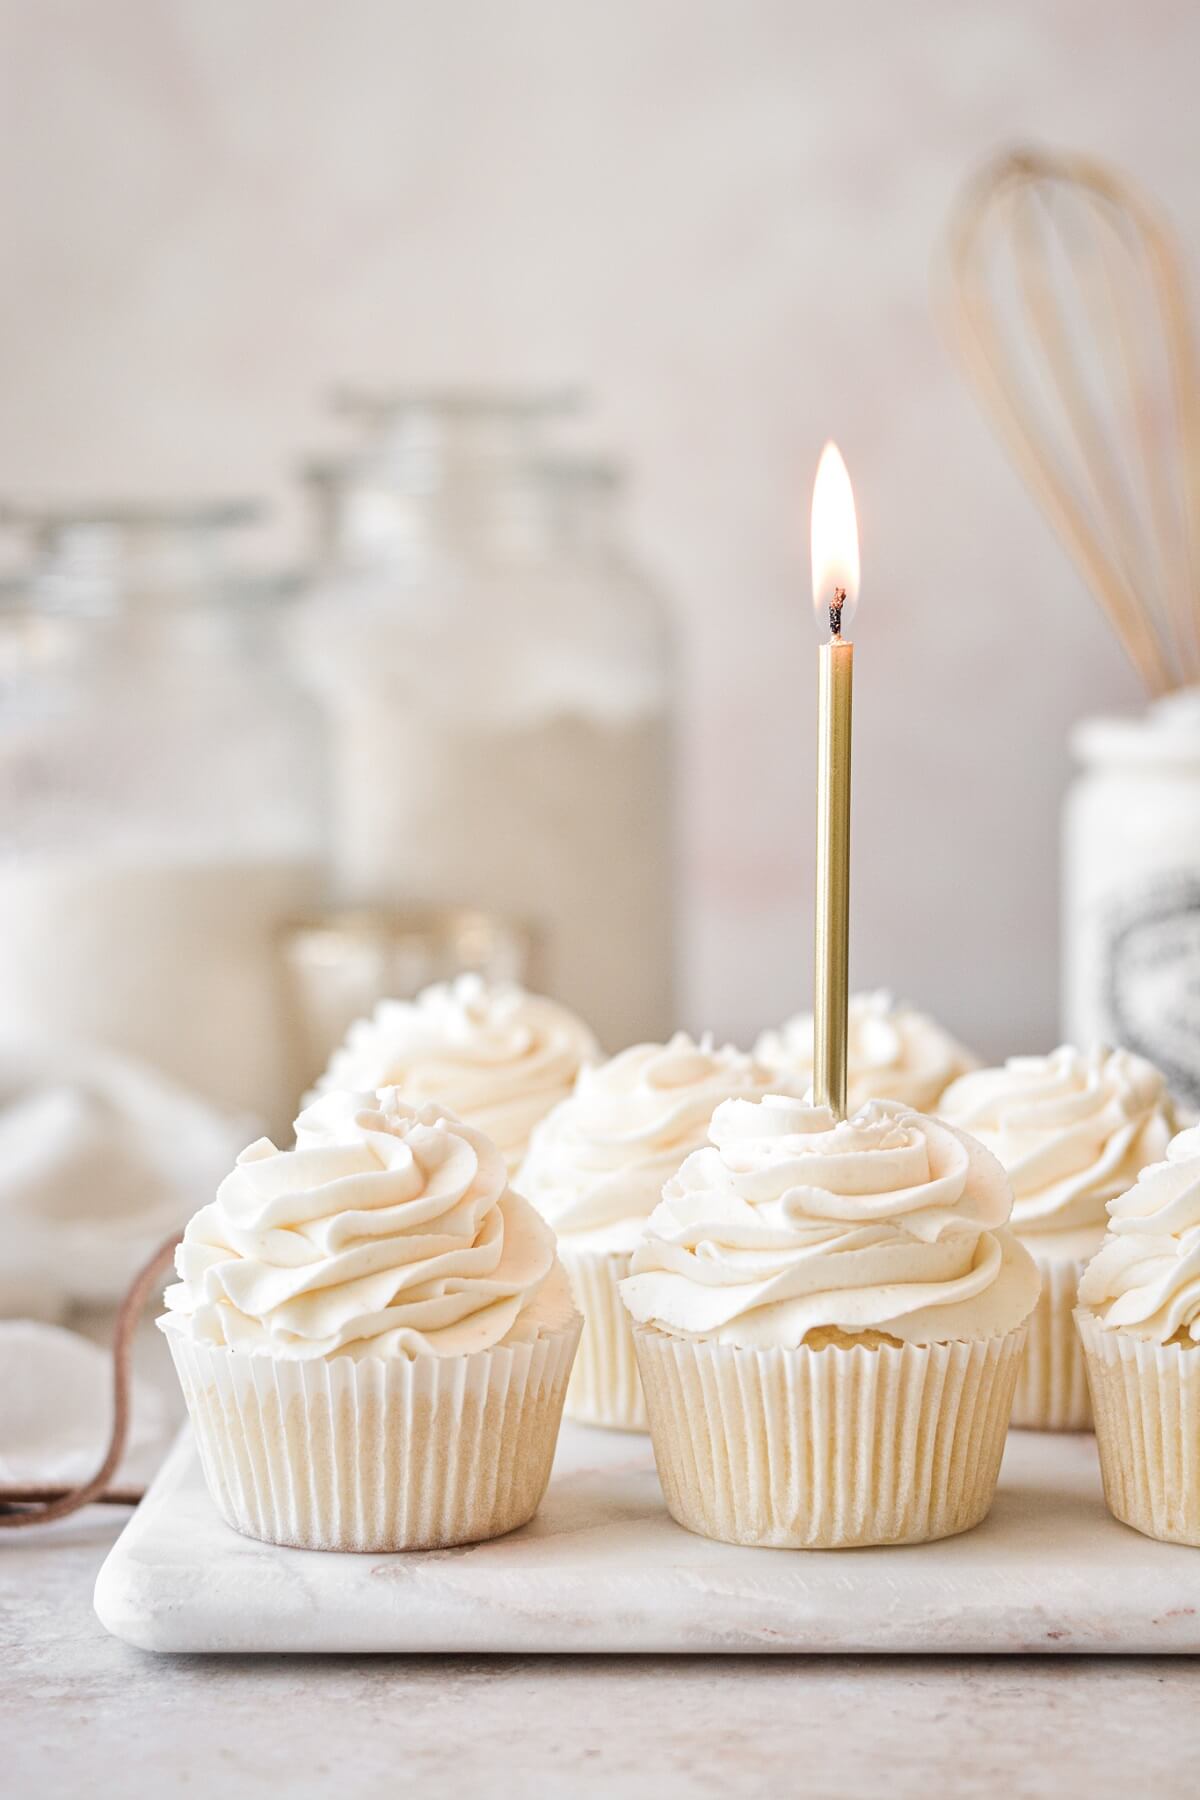 Vanilla cupcakes with a gold birthday candle.